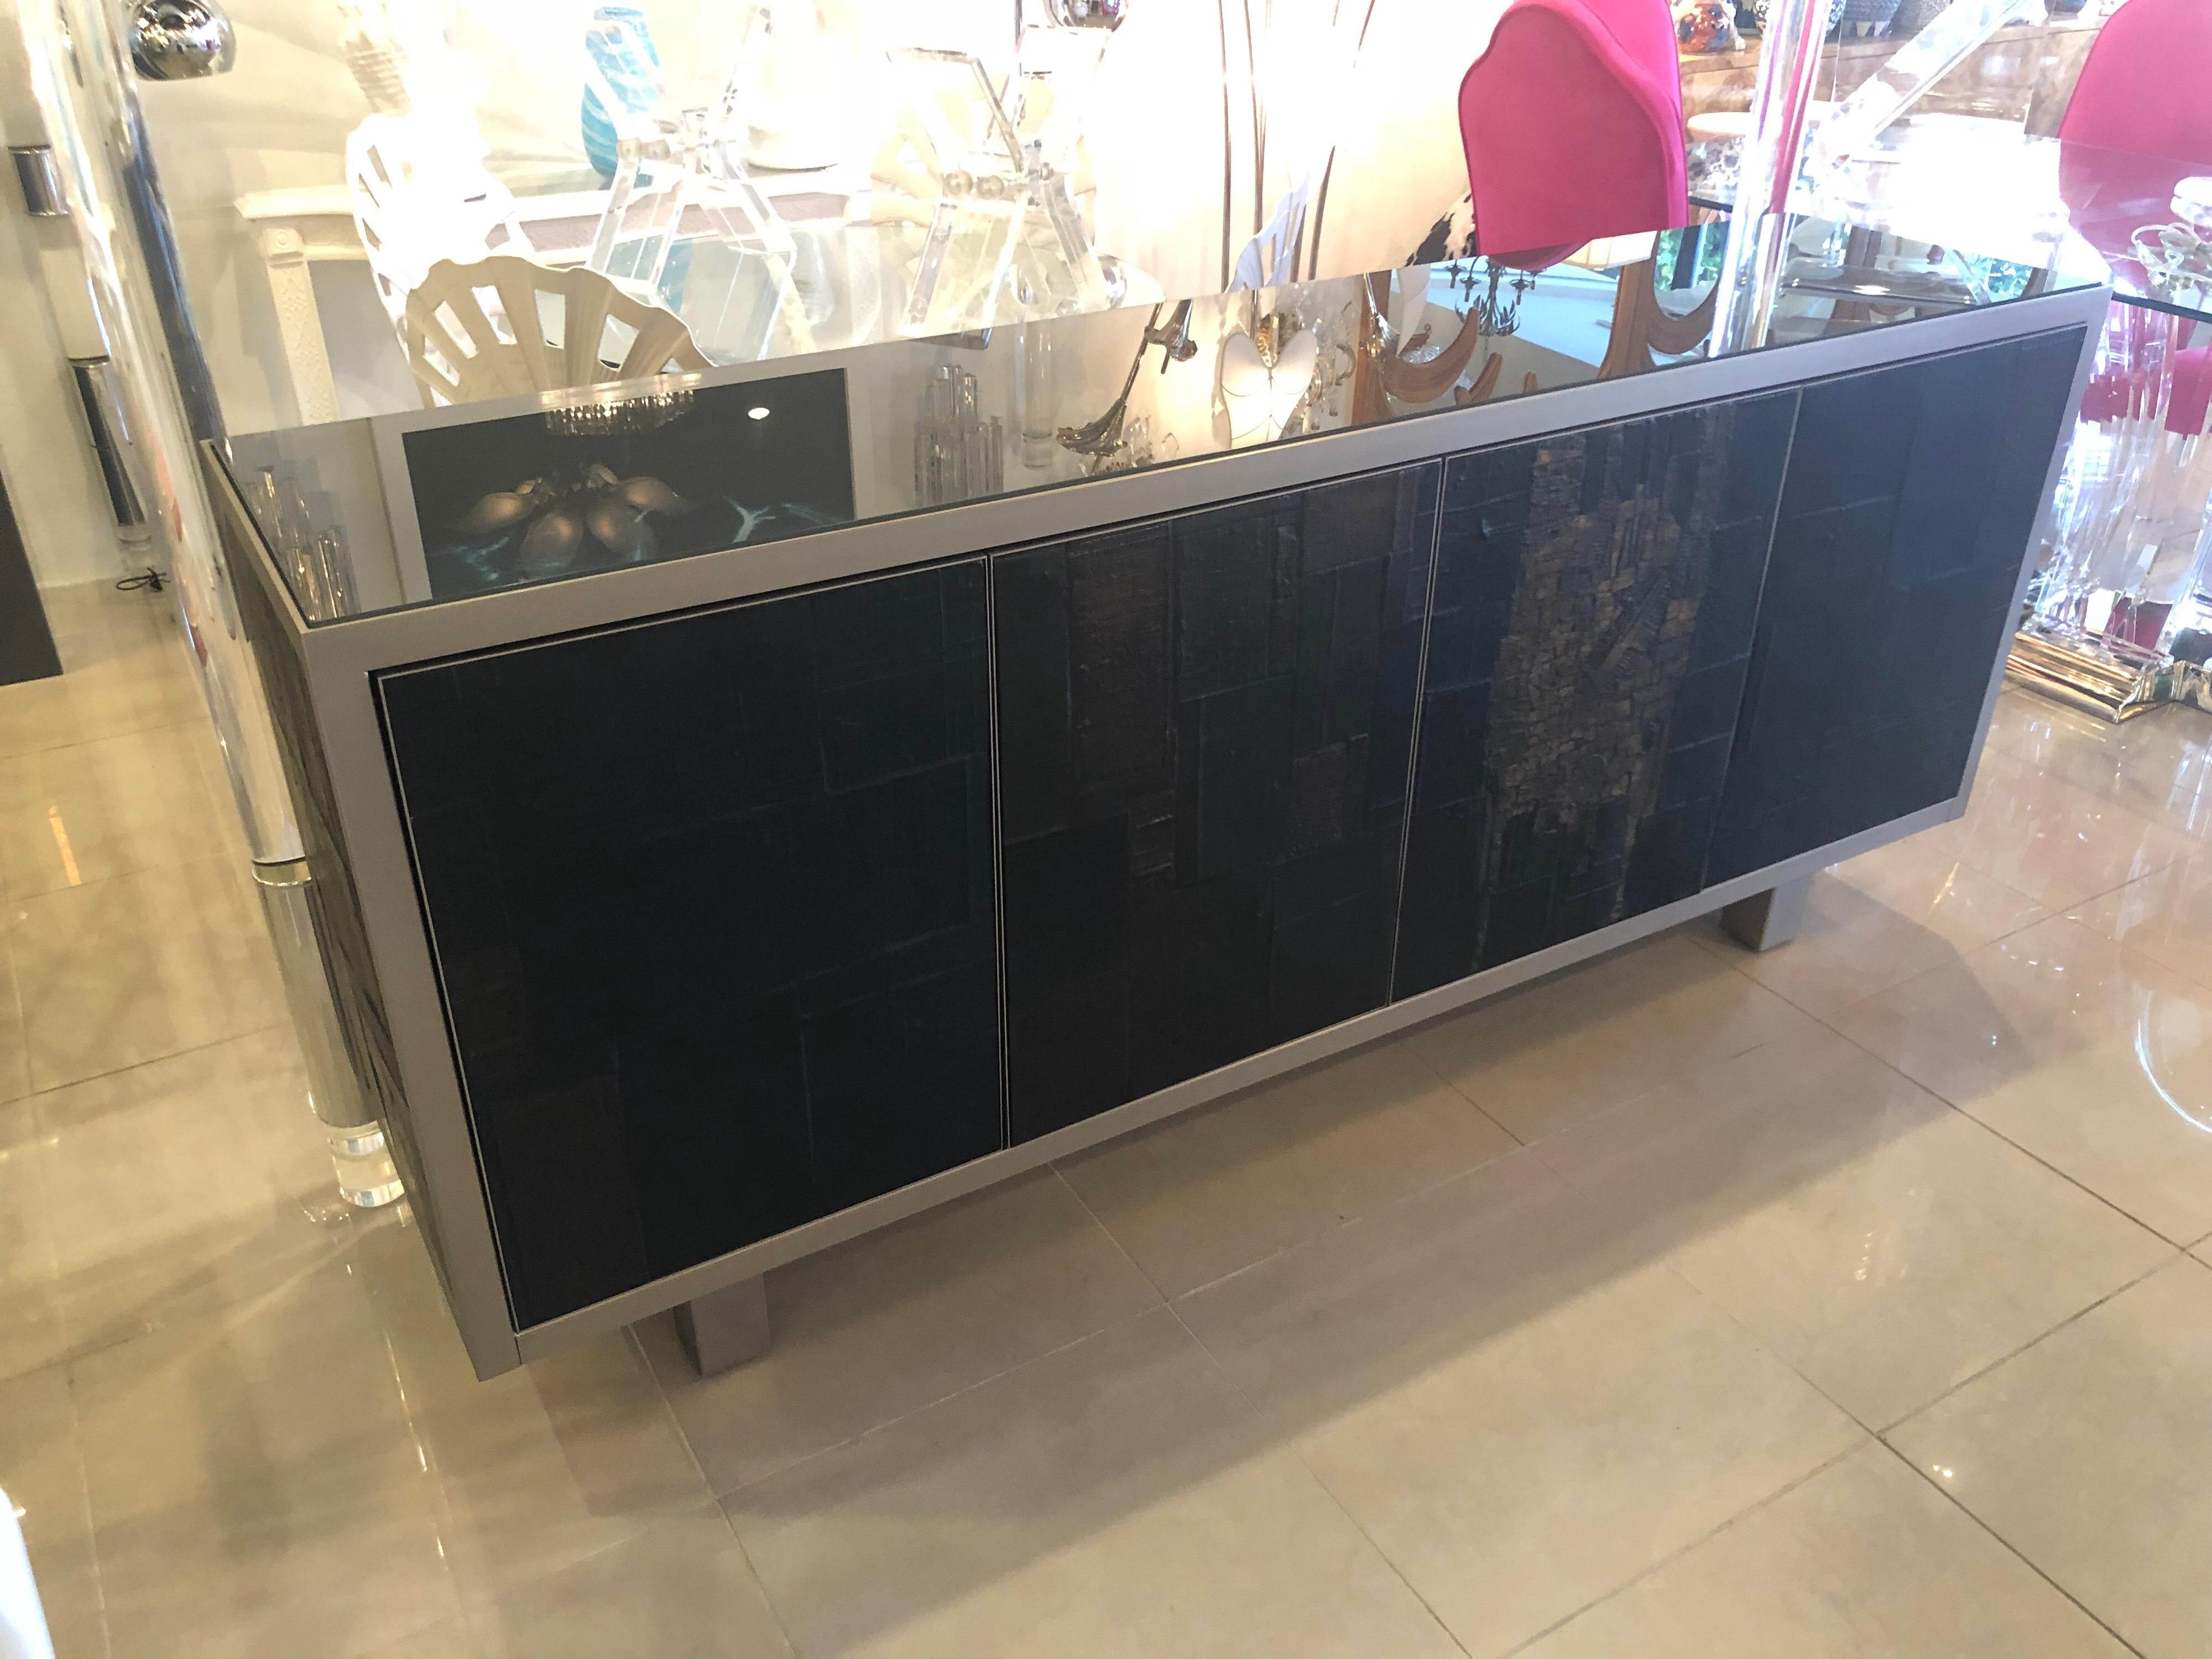 Rare signed Pia Manu (pictures) Ceramic slate sculpted 4-door Credenza Buffet Sideboard. One side has a lined drawer (pictured) and the other side has the original glass shelf (pictured). There are some minor scuffs to the side metal (shown in two